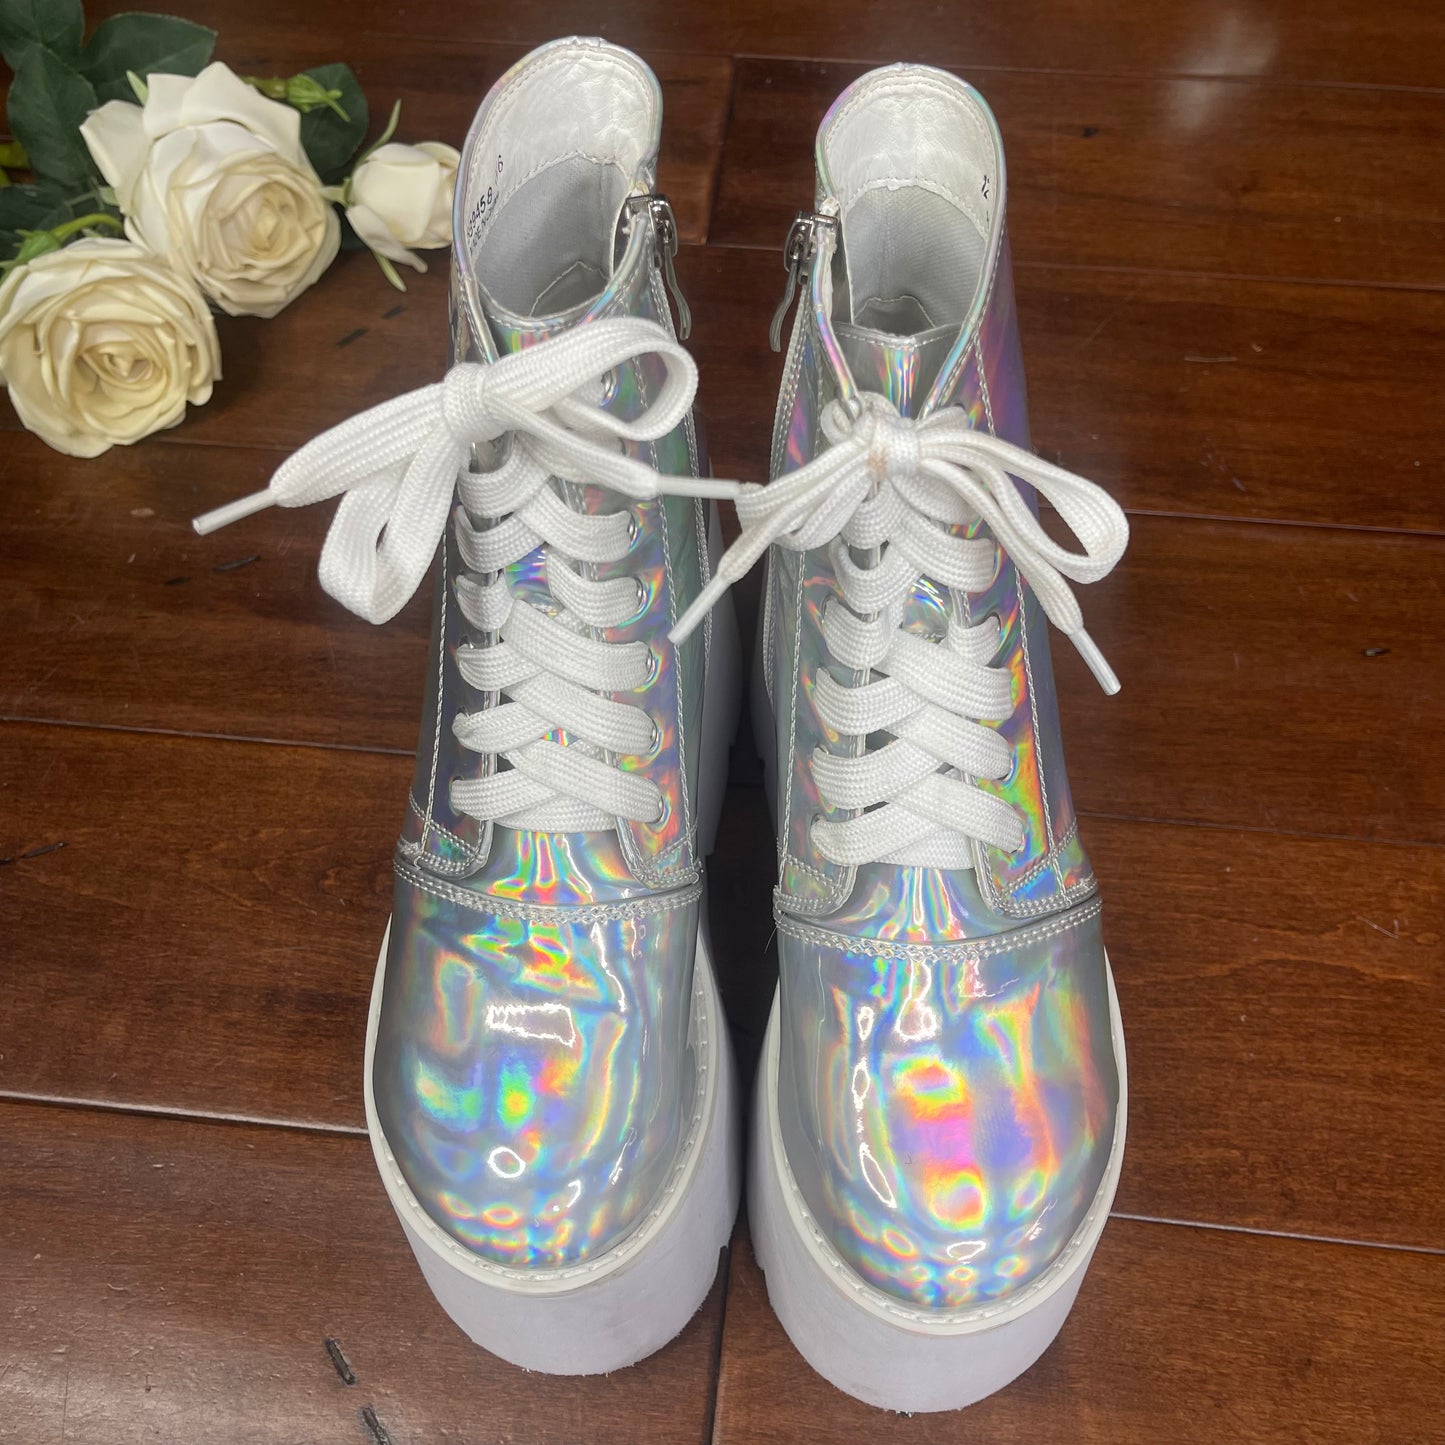 THRIFTED HOT TOPIC IRIDESCENT PLATFORM BOOTS